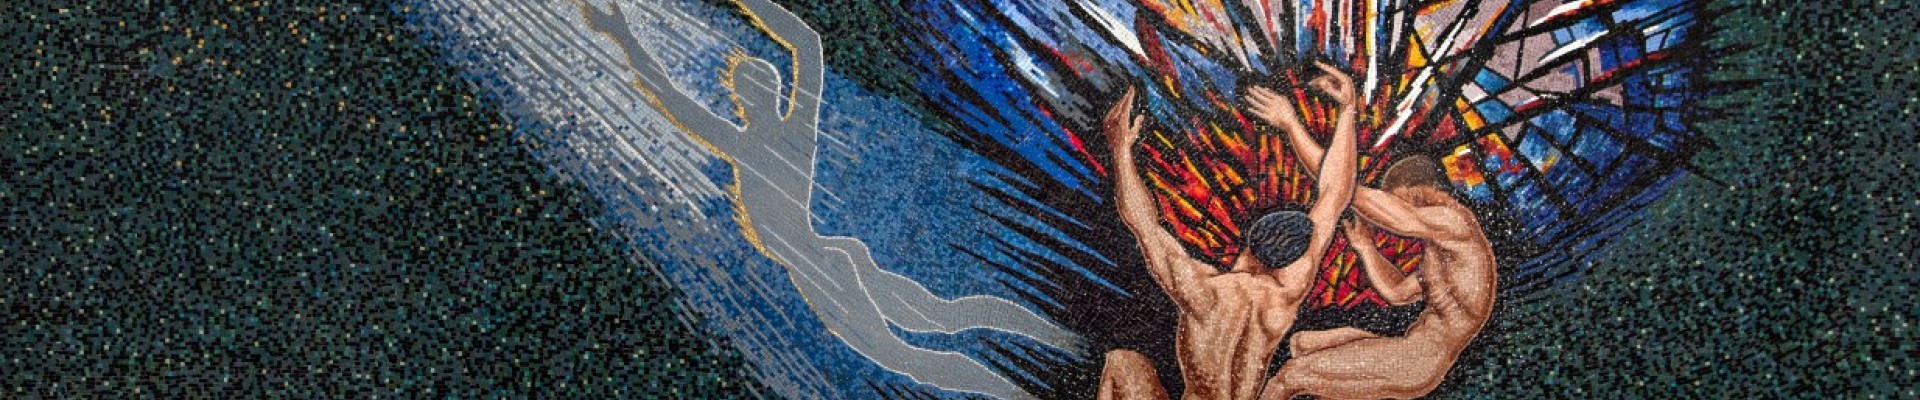 Don Ross mosaic at Anzac Square Memorial Galleries